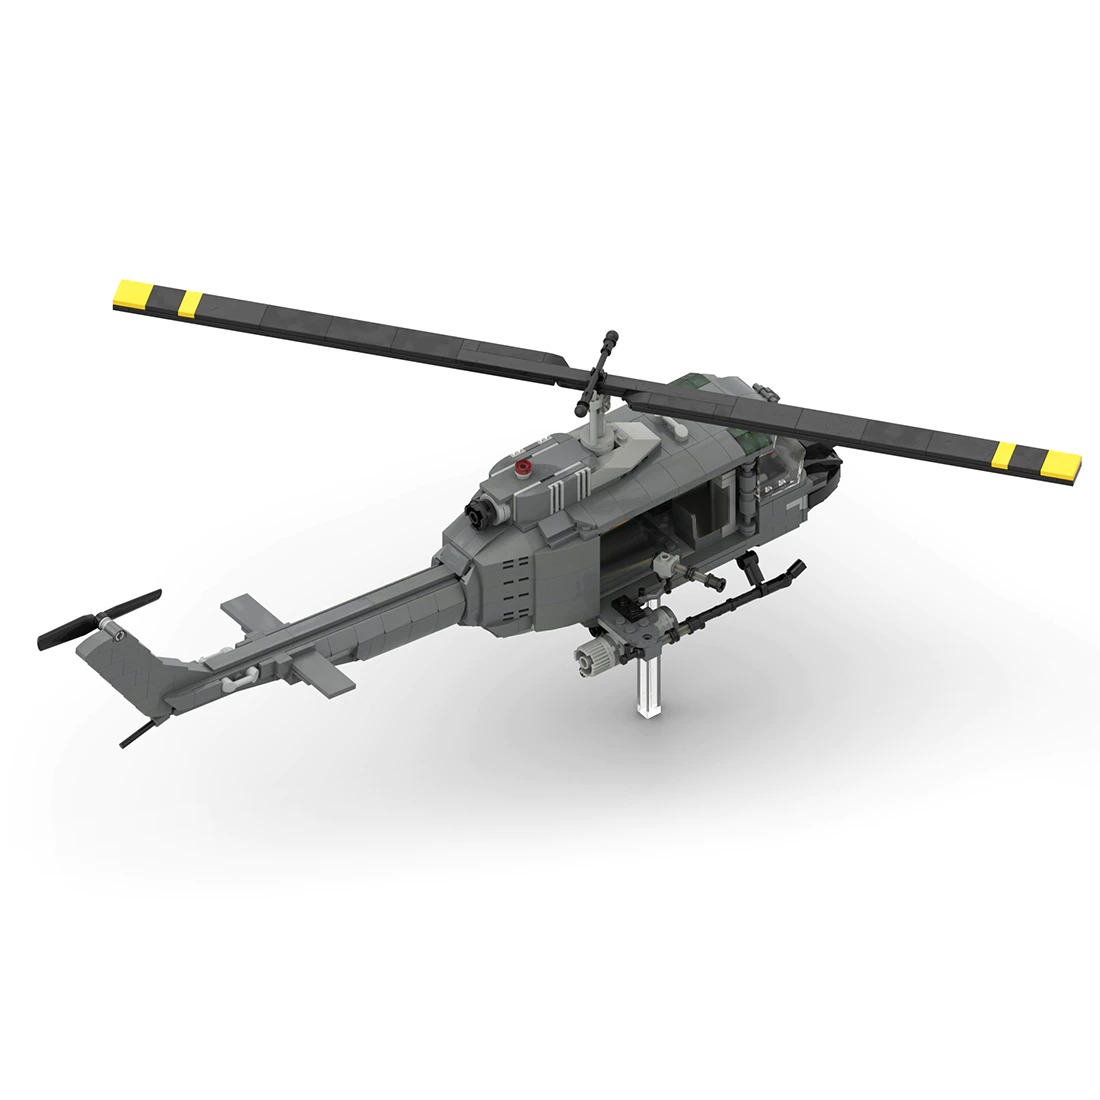 authorized moc 74181 bell uh 1 iroquois main 4 - DECOOL